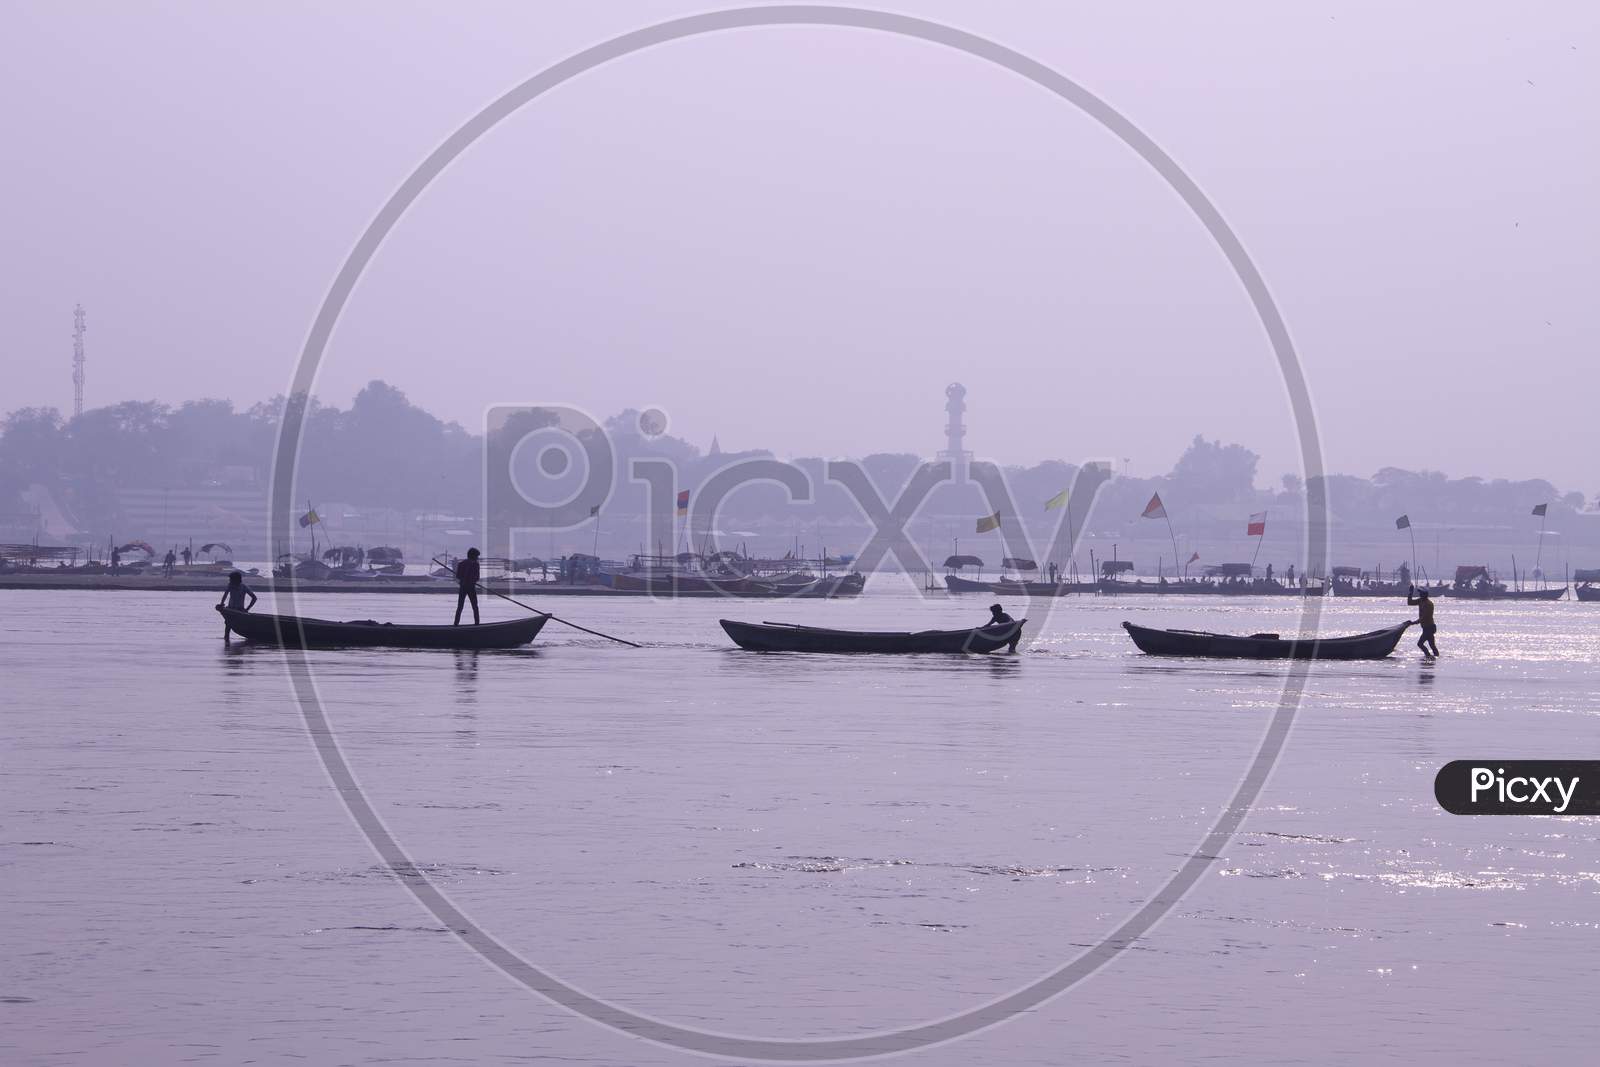 A View of Boats In  Sangam, the confluence of the Ganges, Yamuna and Saraswati rivers, Prayagraj, previously known as Allahabad, India.